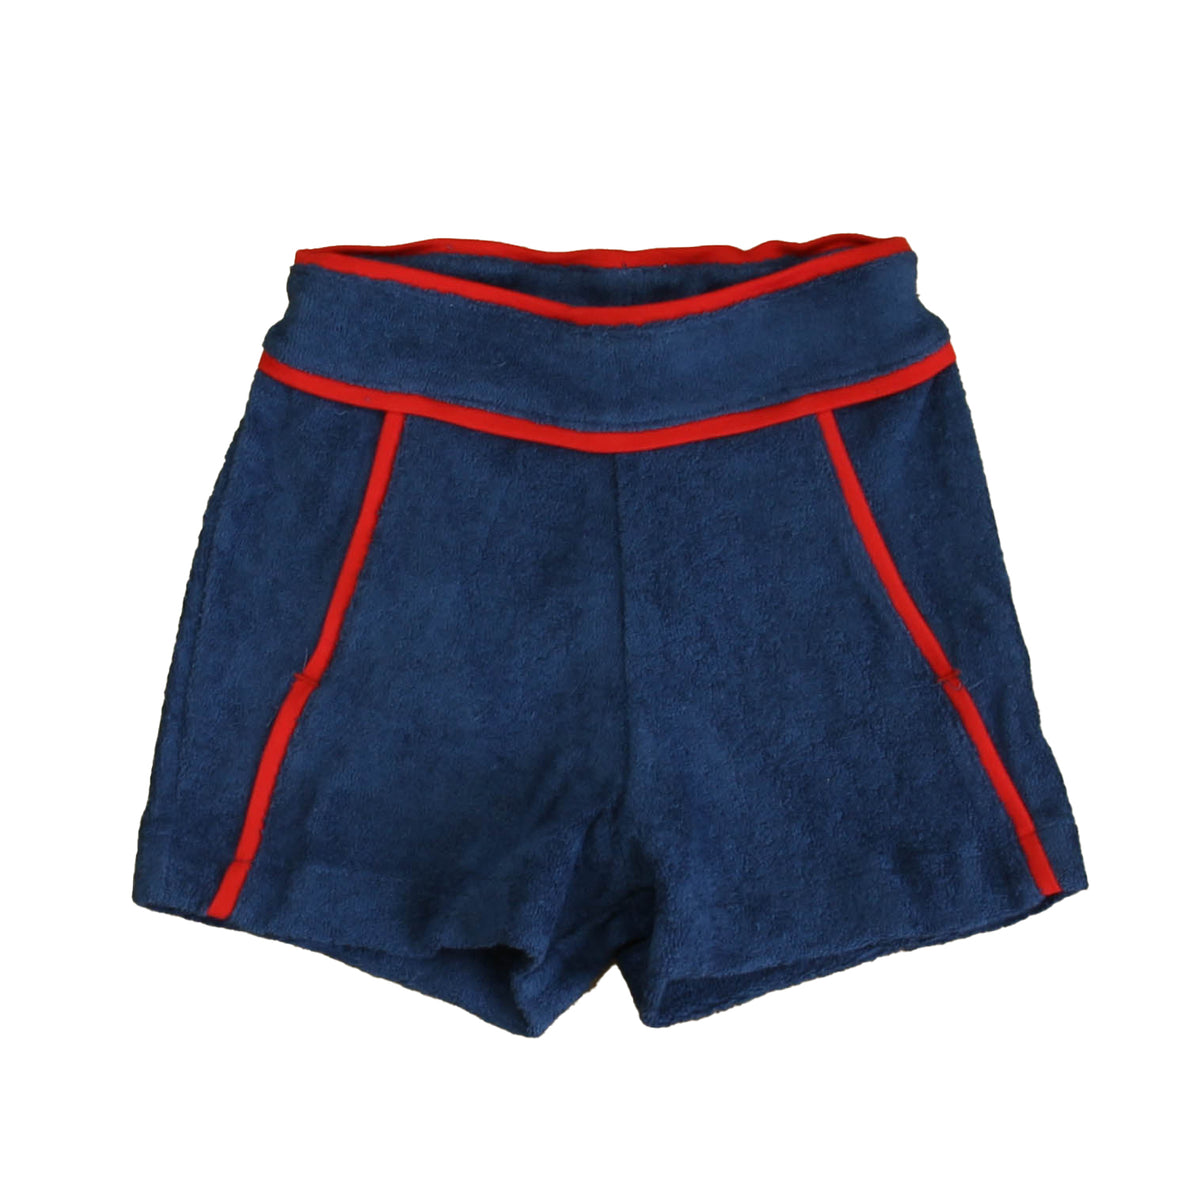 New with Tags: Bright Navy Shorts size: 2-5T -- FINAL SALE